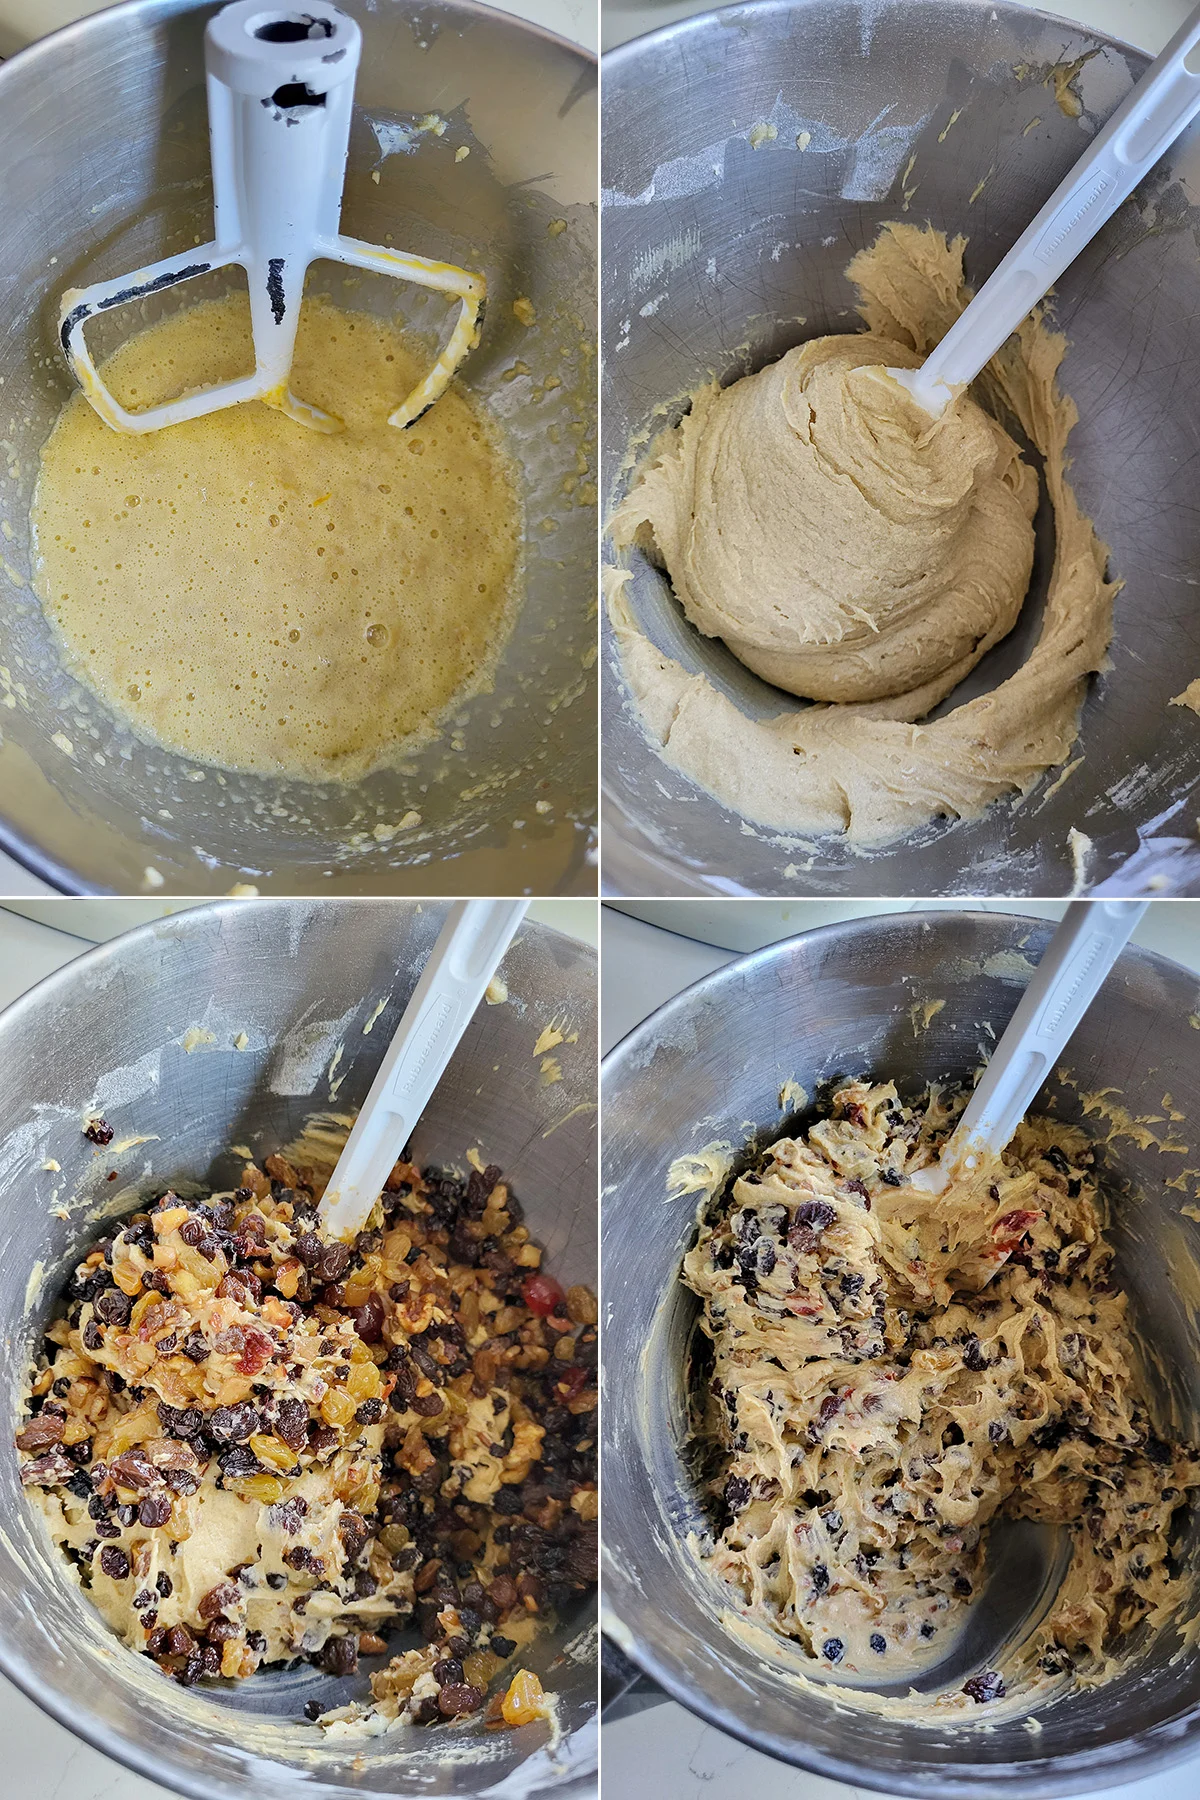 a bowl of eggs, a bowl of cake batter and a bowl of cake batter mixed with dried fruit.